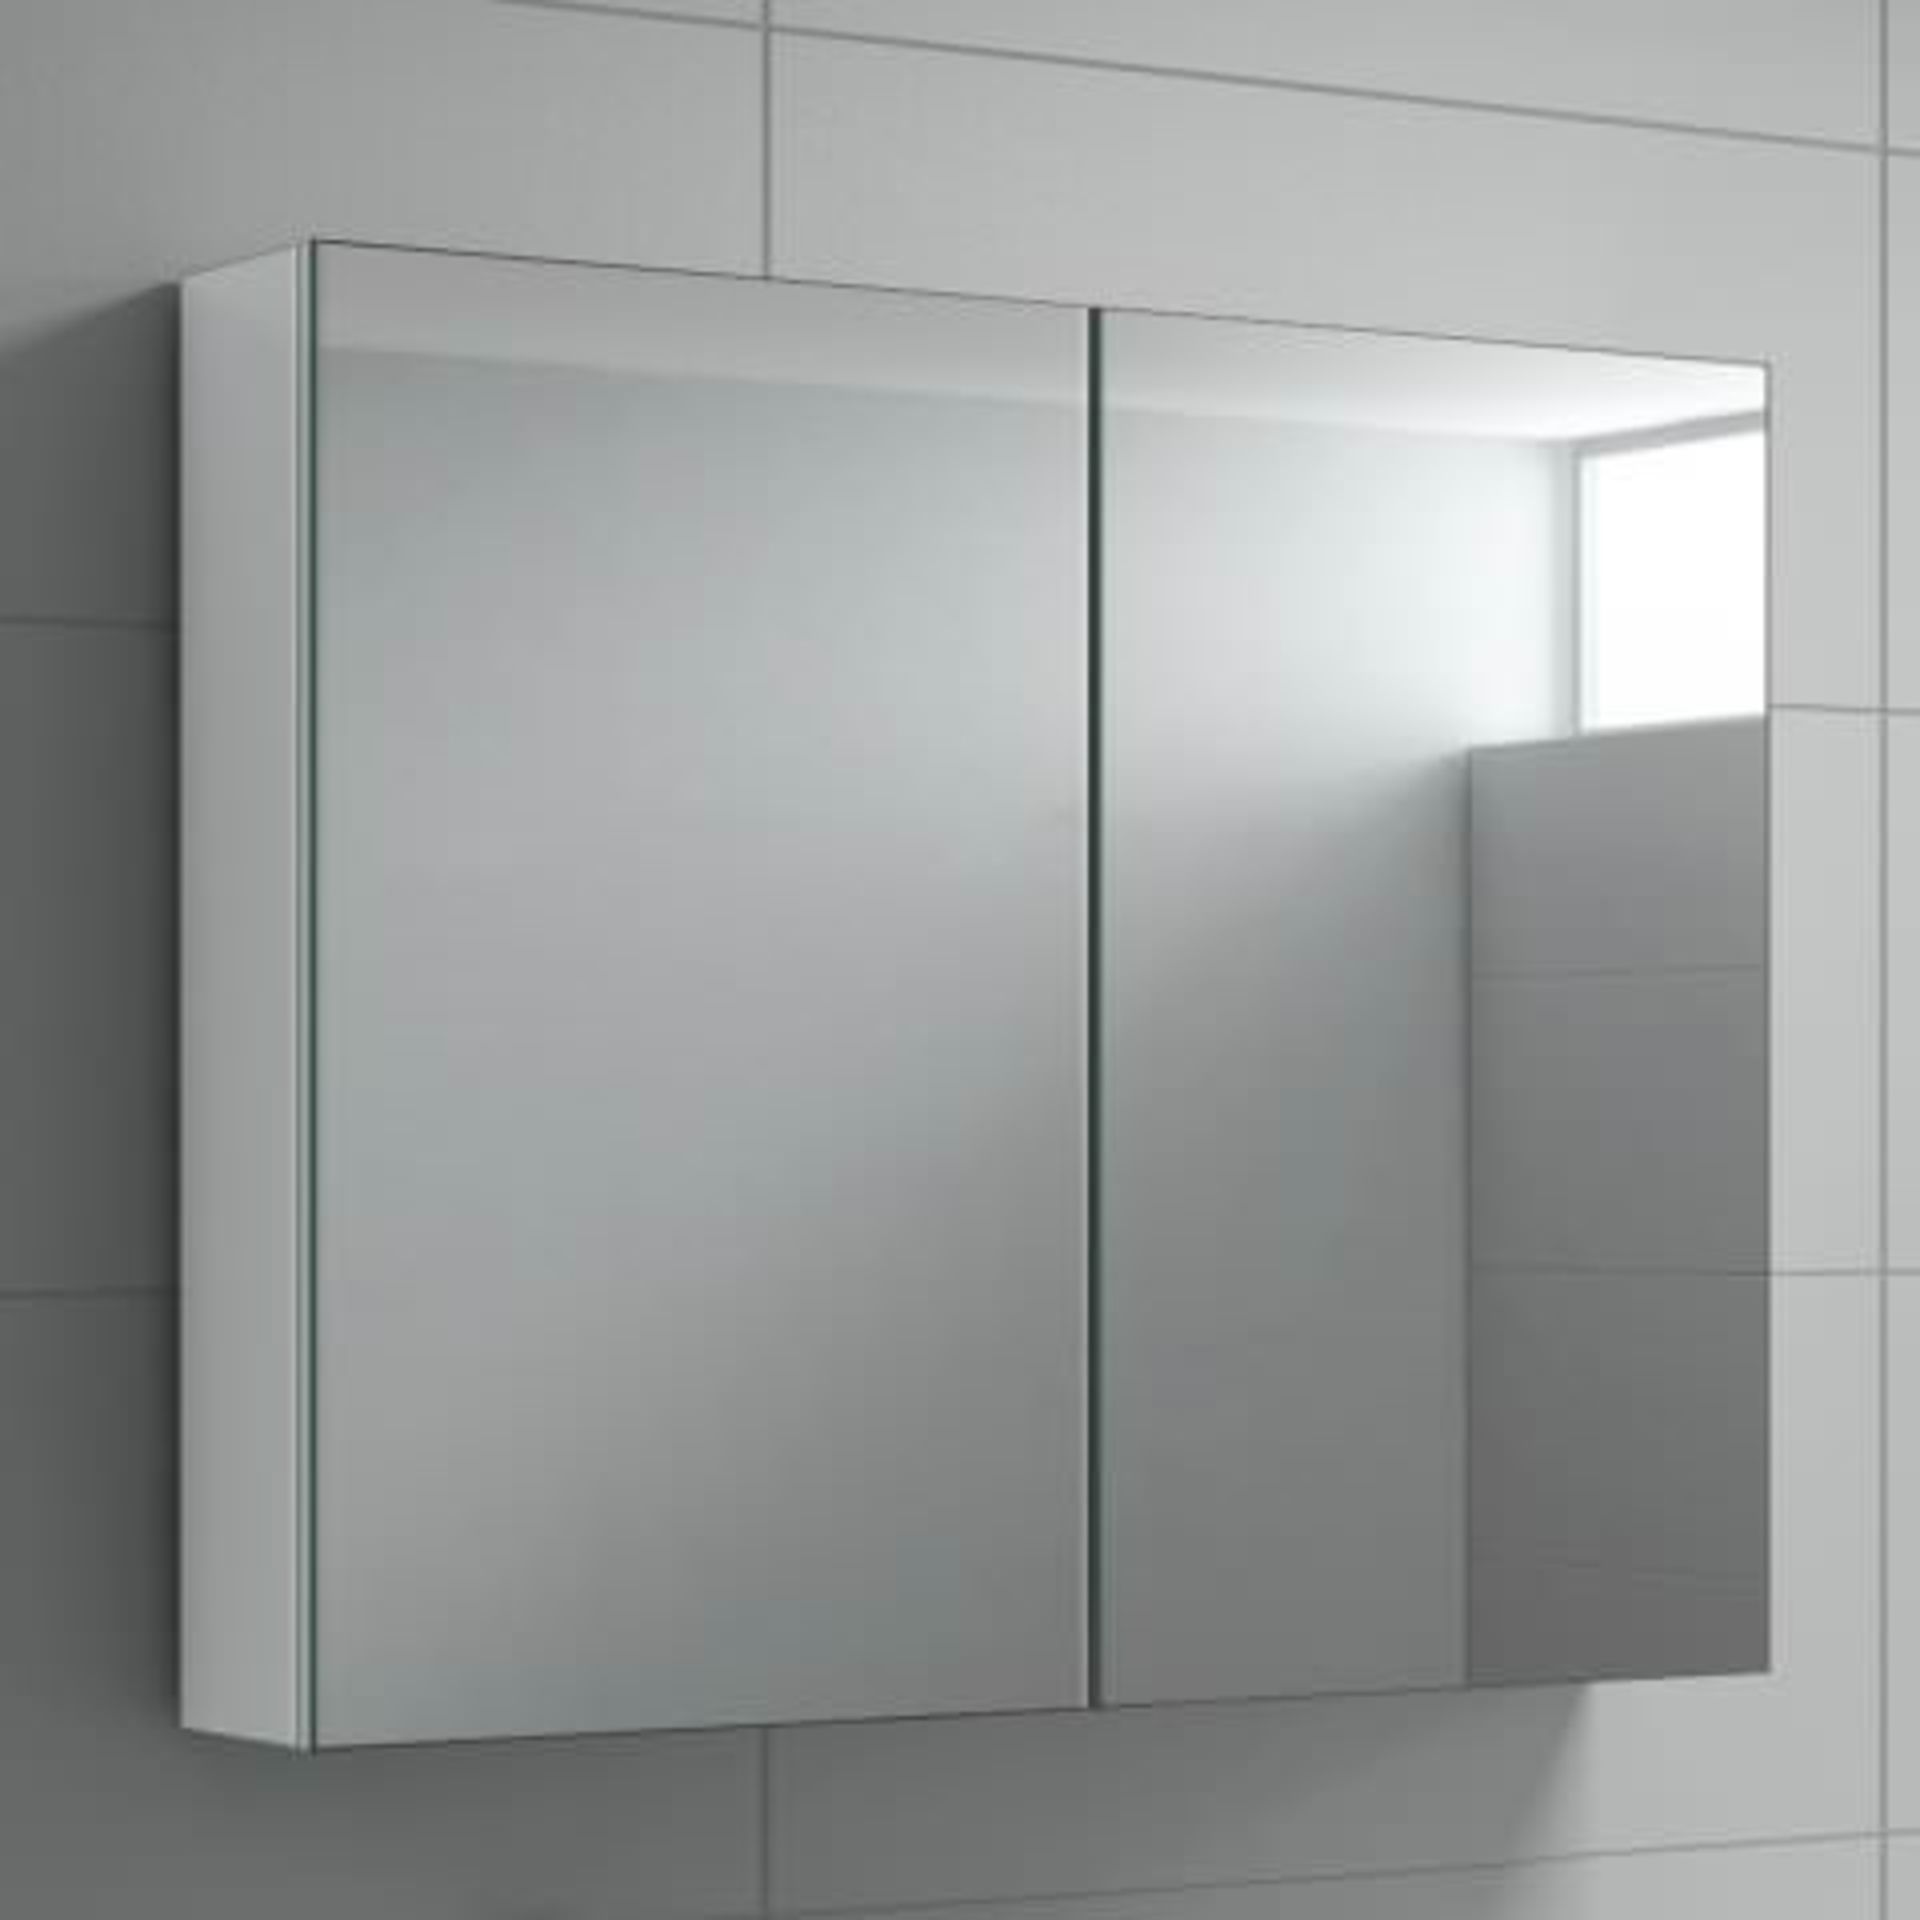 (T203) 667mm Harper Gloss White Double Door Mirror Cabinet RRP £224.99 Reflection Perfection The